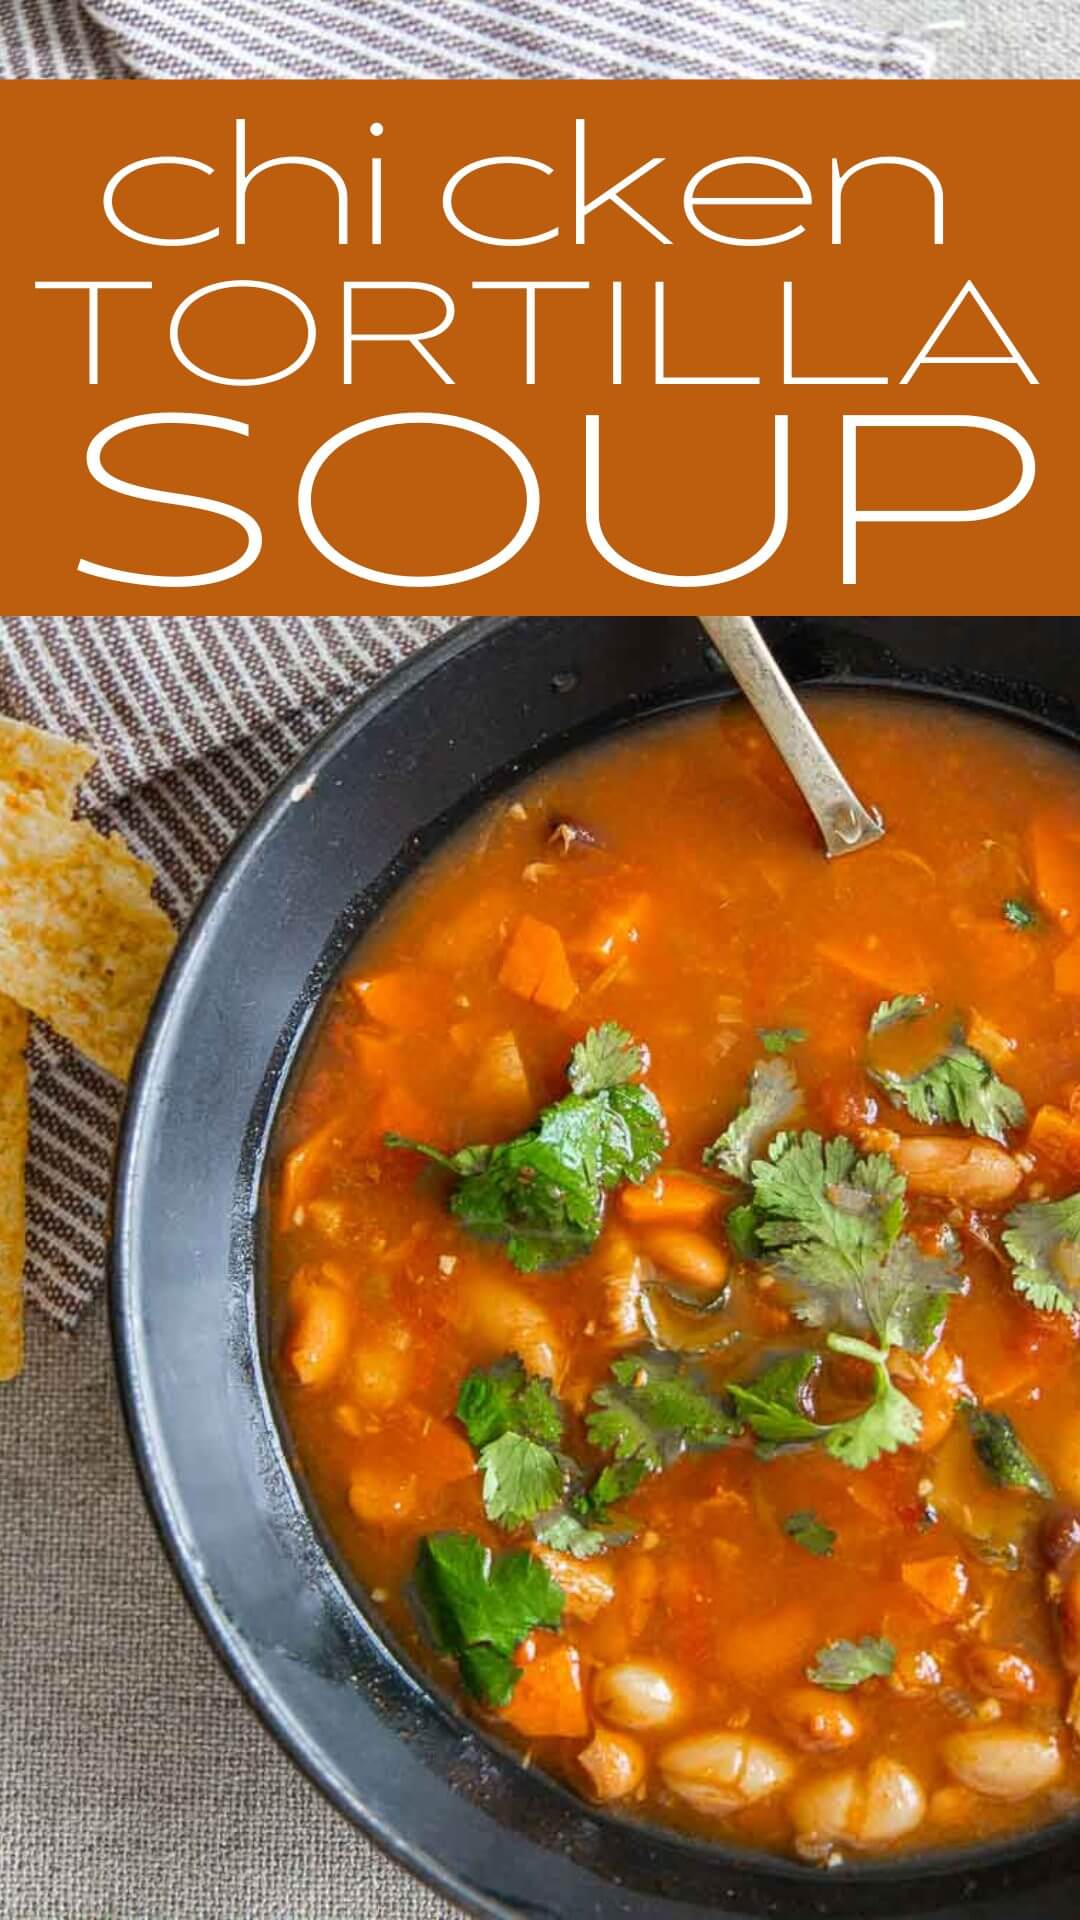 Make the easiest and tastiest tortilla soup recipe ever! With instructions for the stovetop, crockpot and the InstaPot, this recipeworks for your schedule.